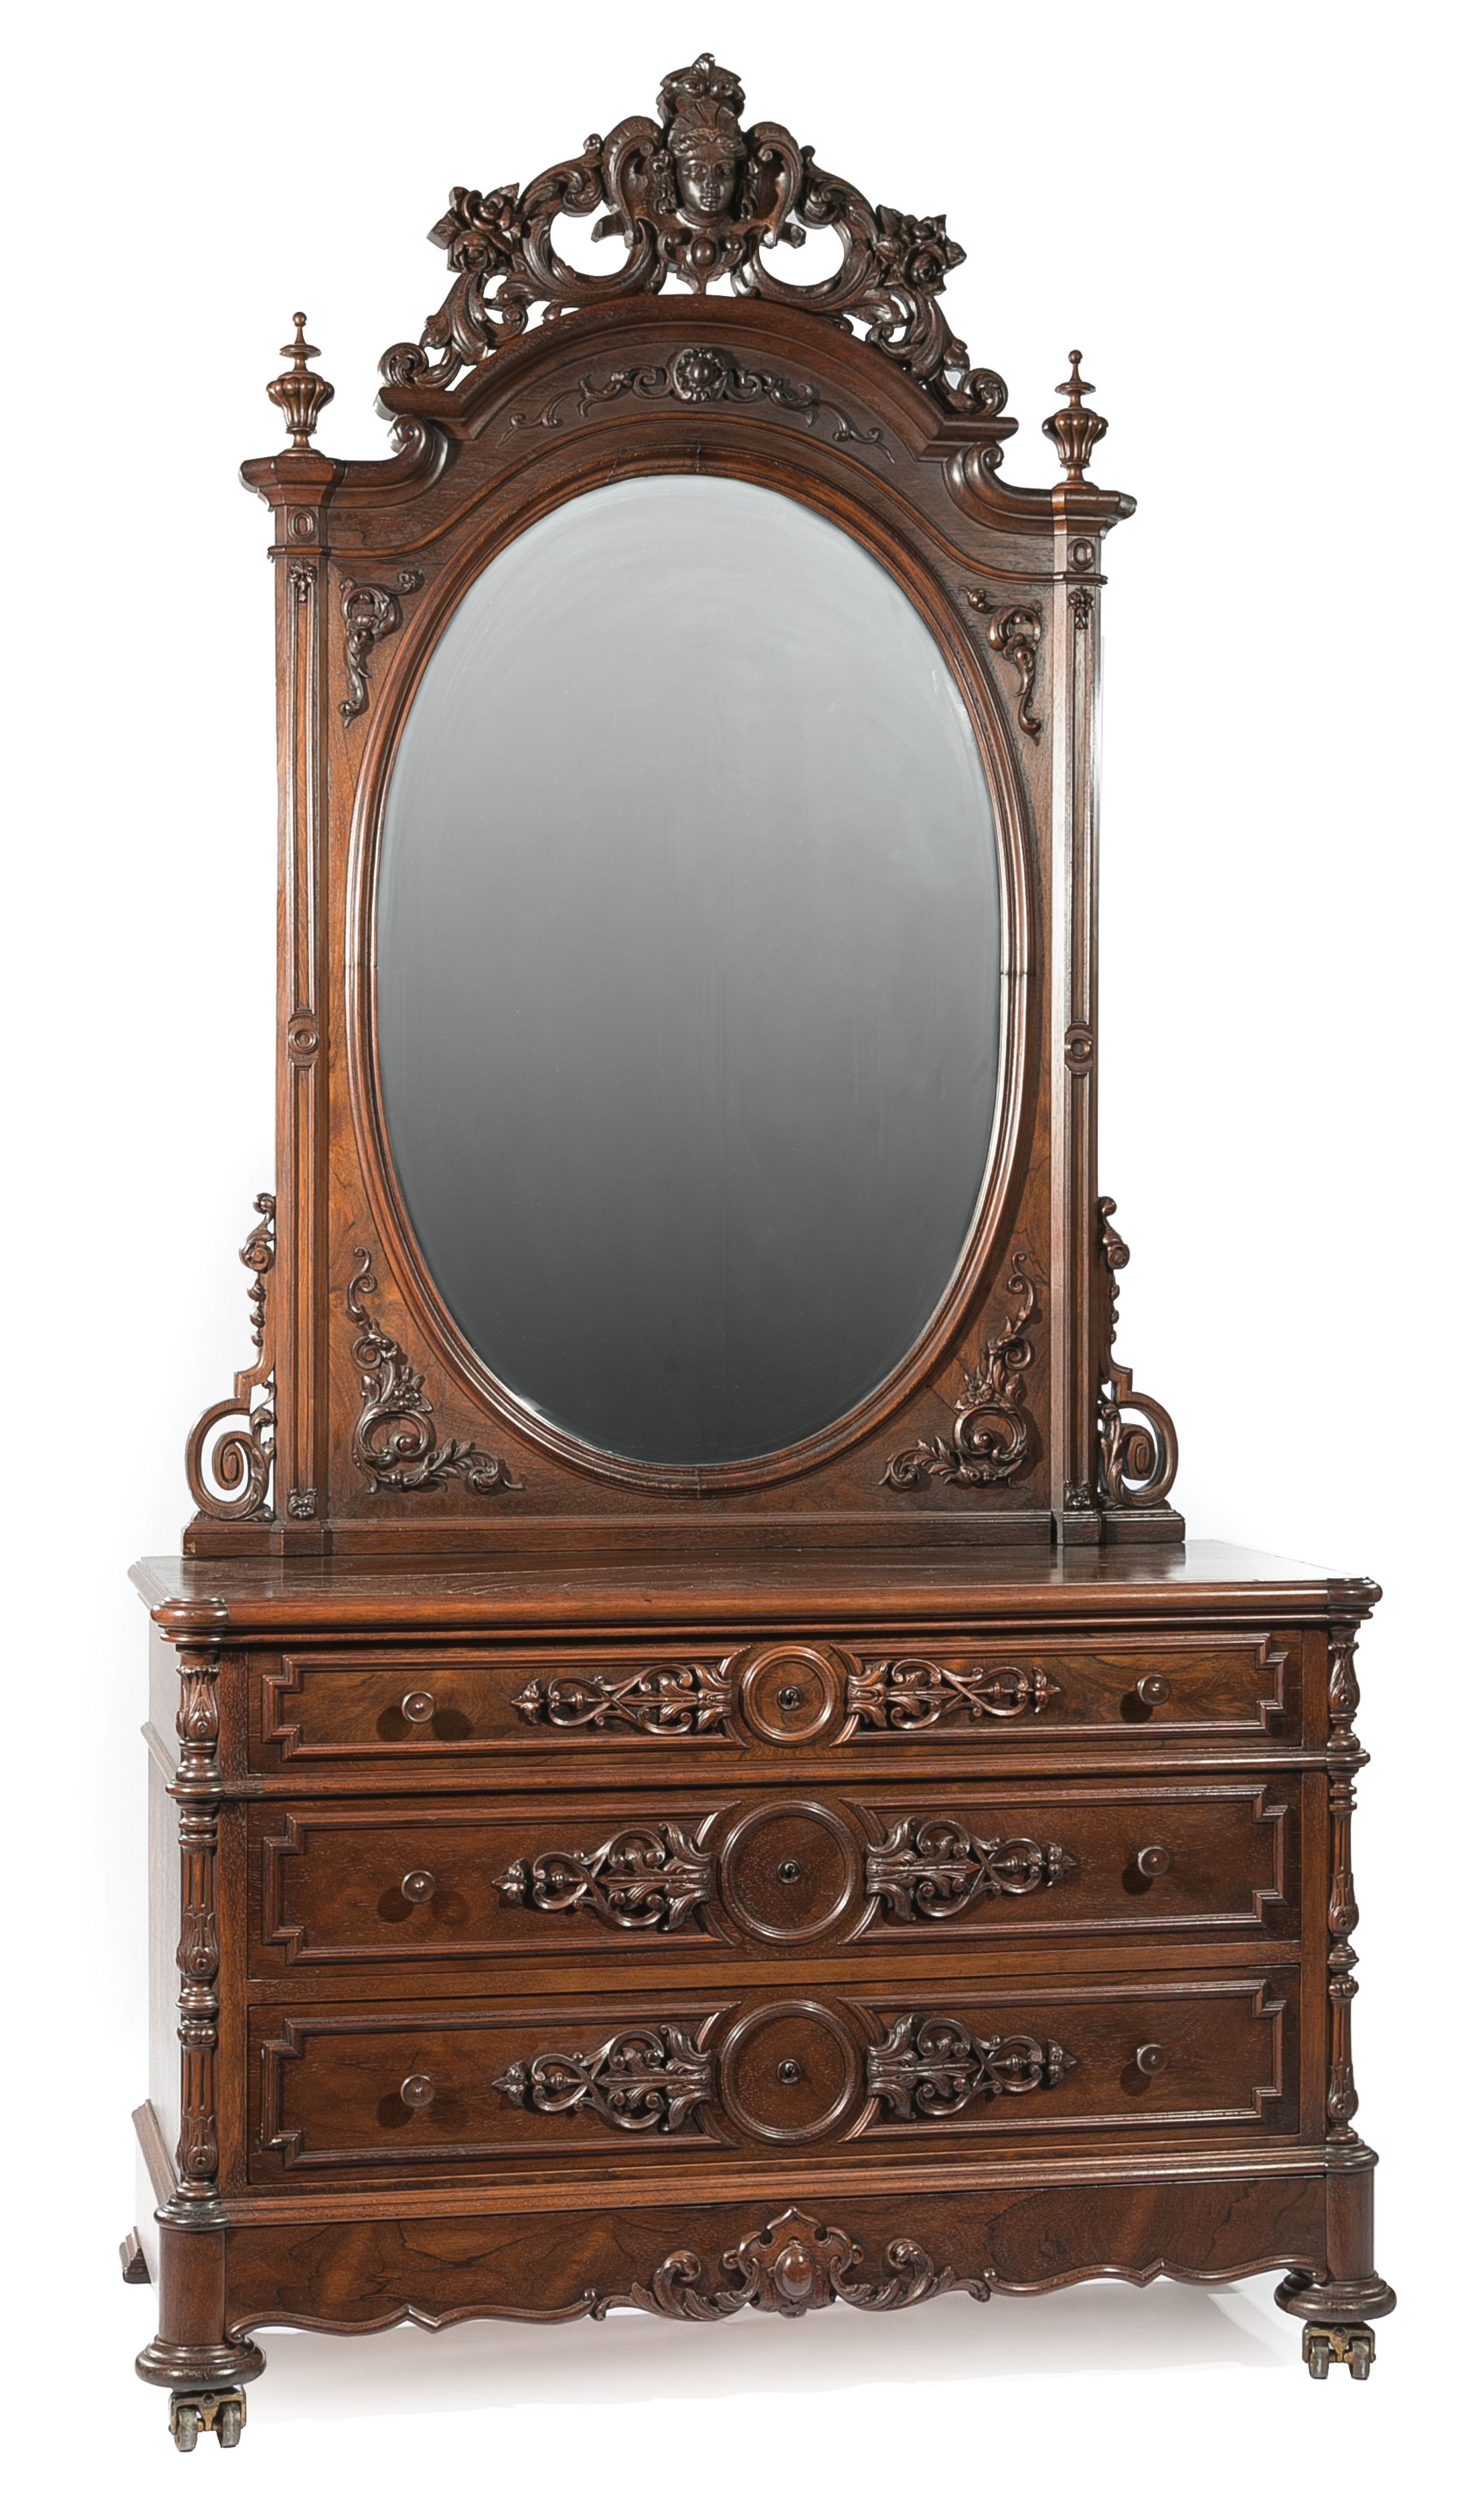 Very Fine American Carved Rosewood Bedroom Suite , mid-19th c., labeled A. (Alexander) Roux, incl. - Image 2 of 20